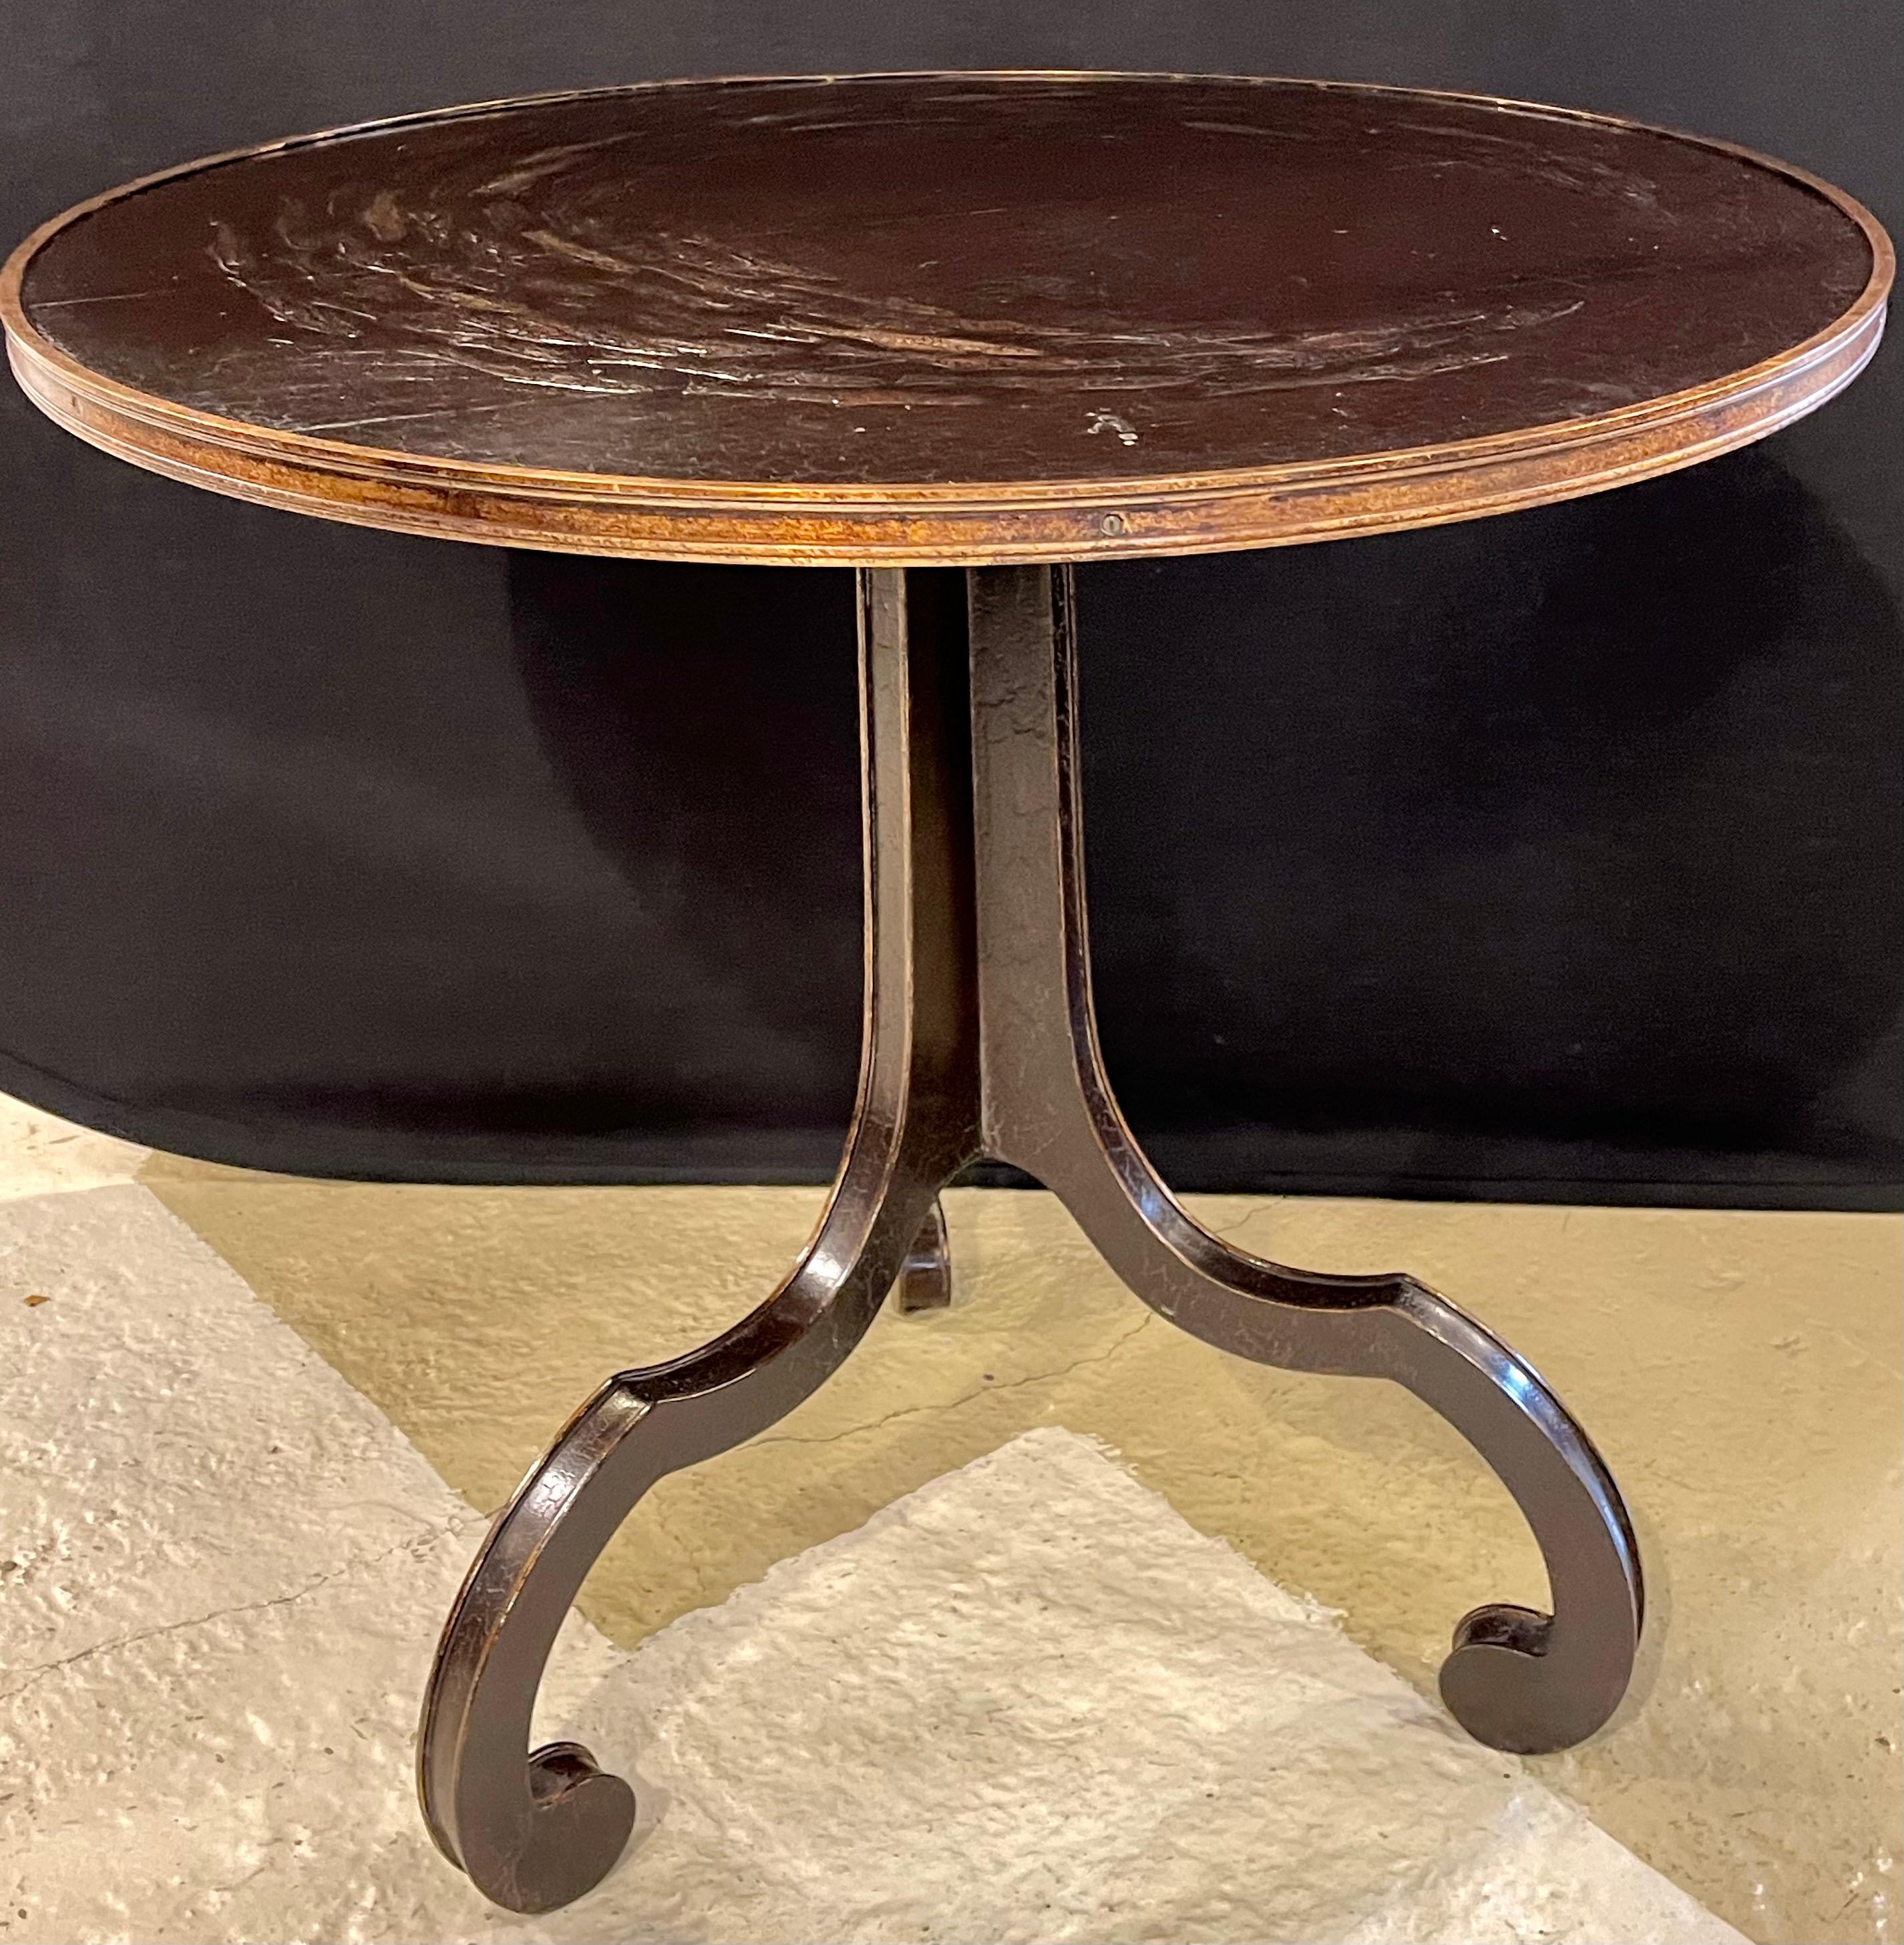 Rose Tarlow Melrose House La Mer Centre Table The top depicting a school of fish. This sleek and stylish center, end or lamp table has a tripod crackle ware and parcel-gilt bordered base supporting a gilt framed tabletop. The top having a large